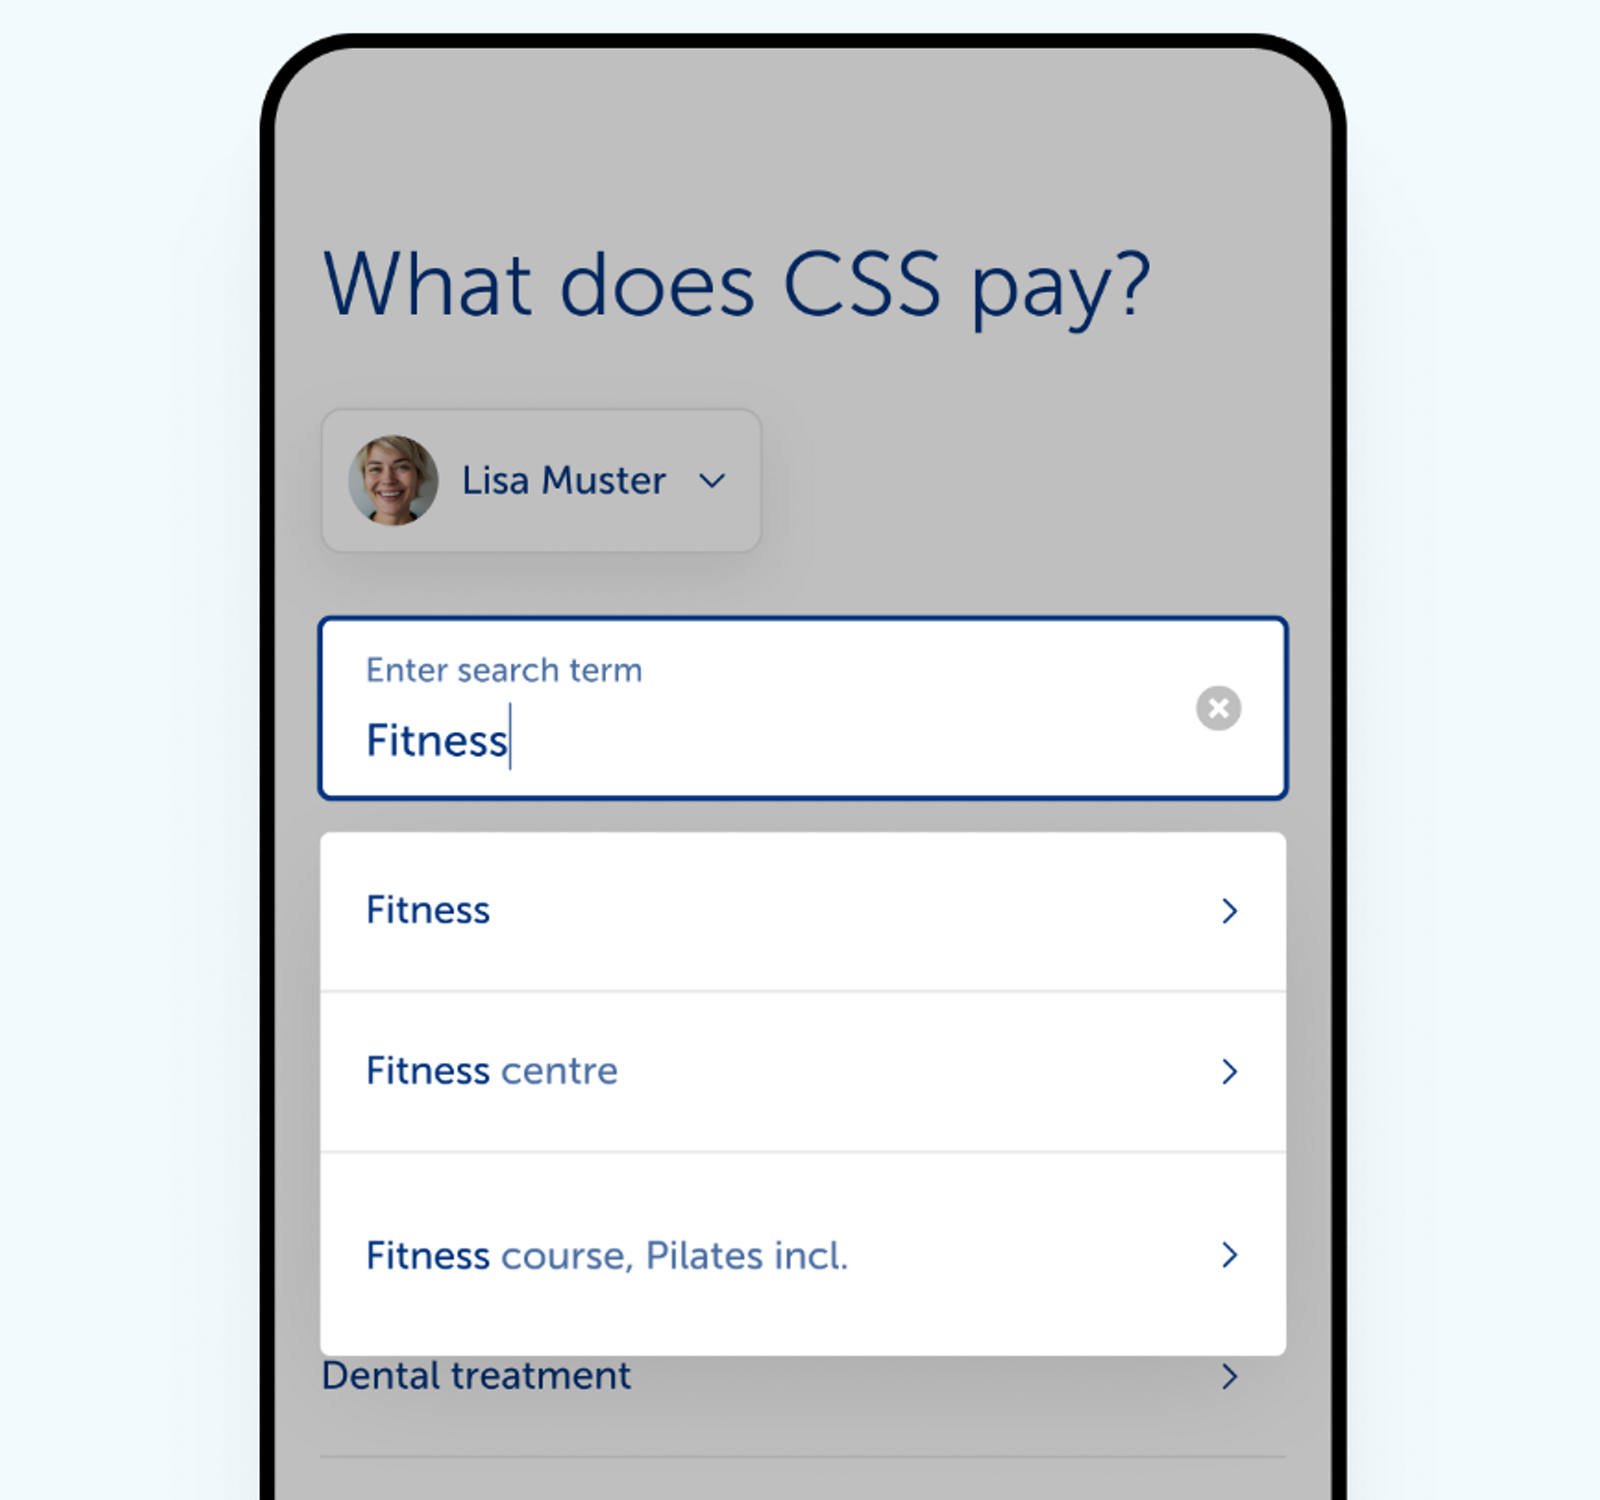 See instantly how much CSS pays